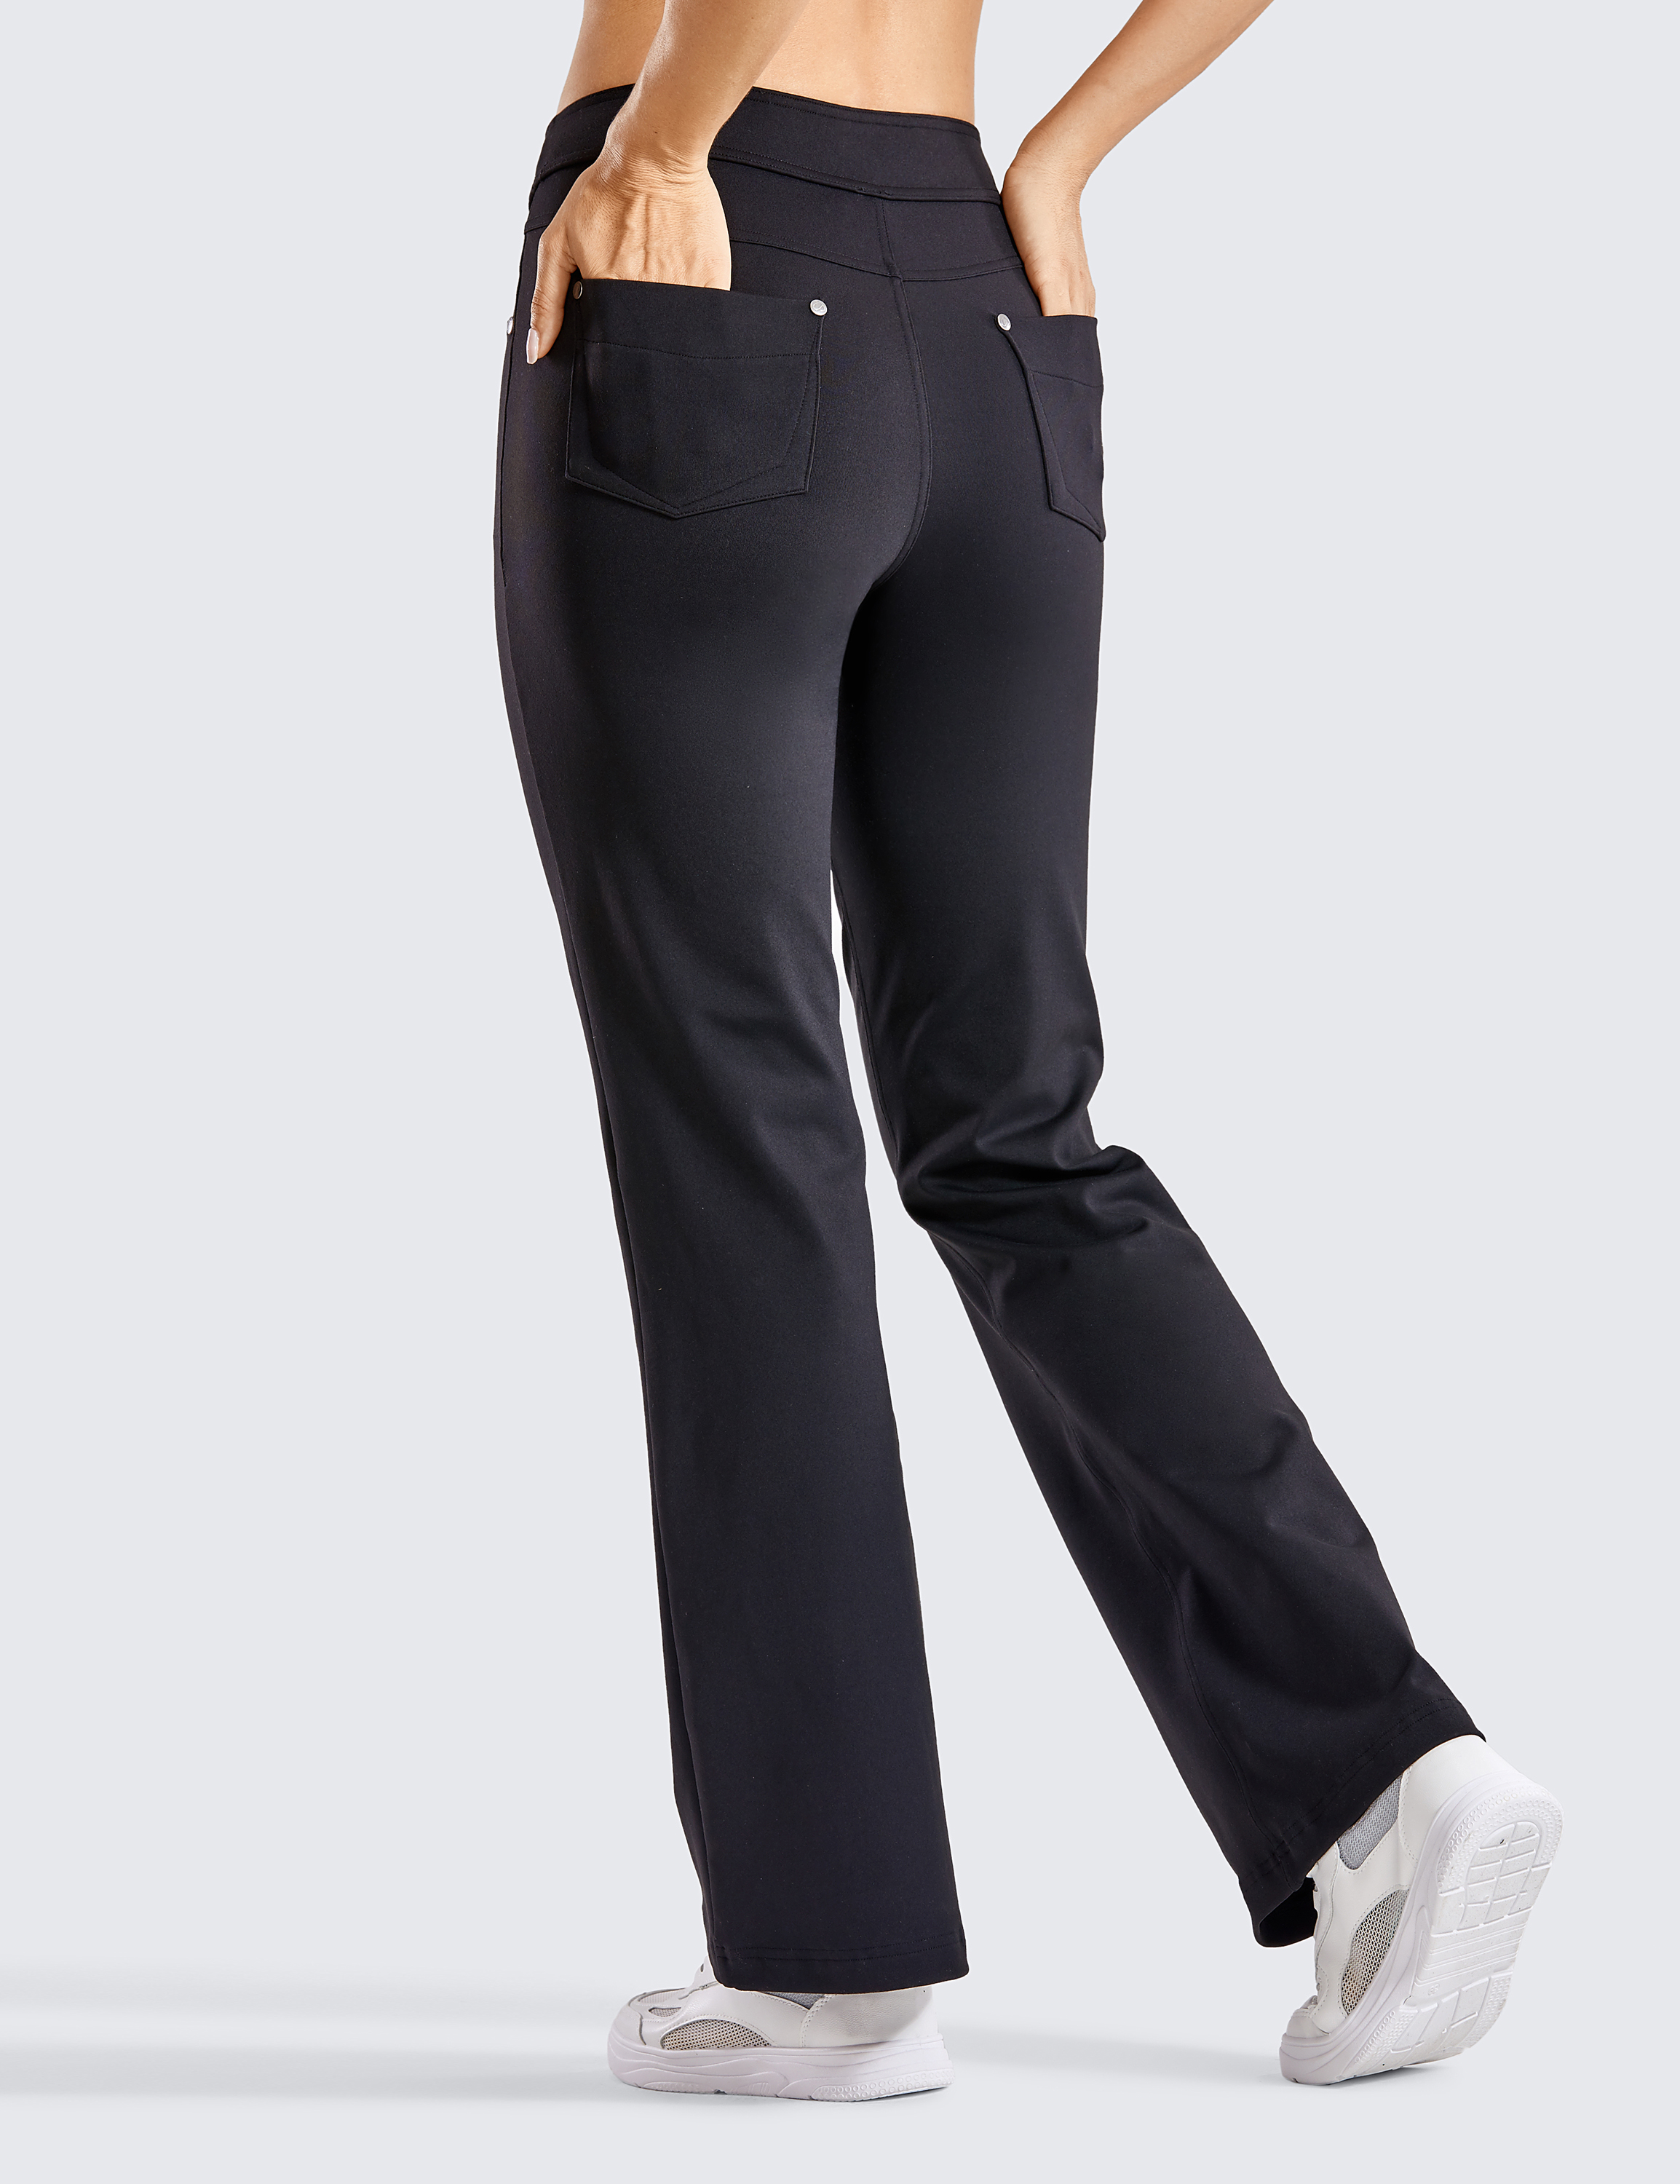 MOVE BEYOND Buttery Soft Women's Bootcut Yoga Pants with 4 Pockets